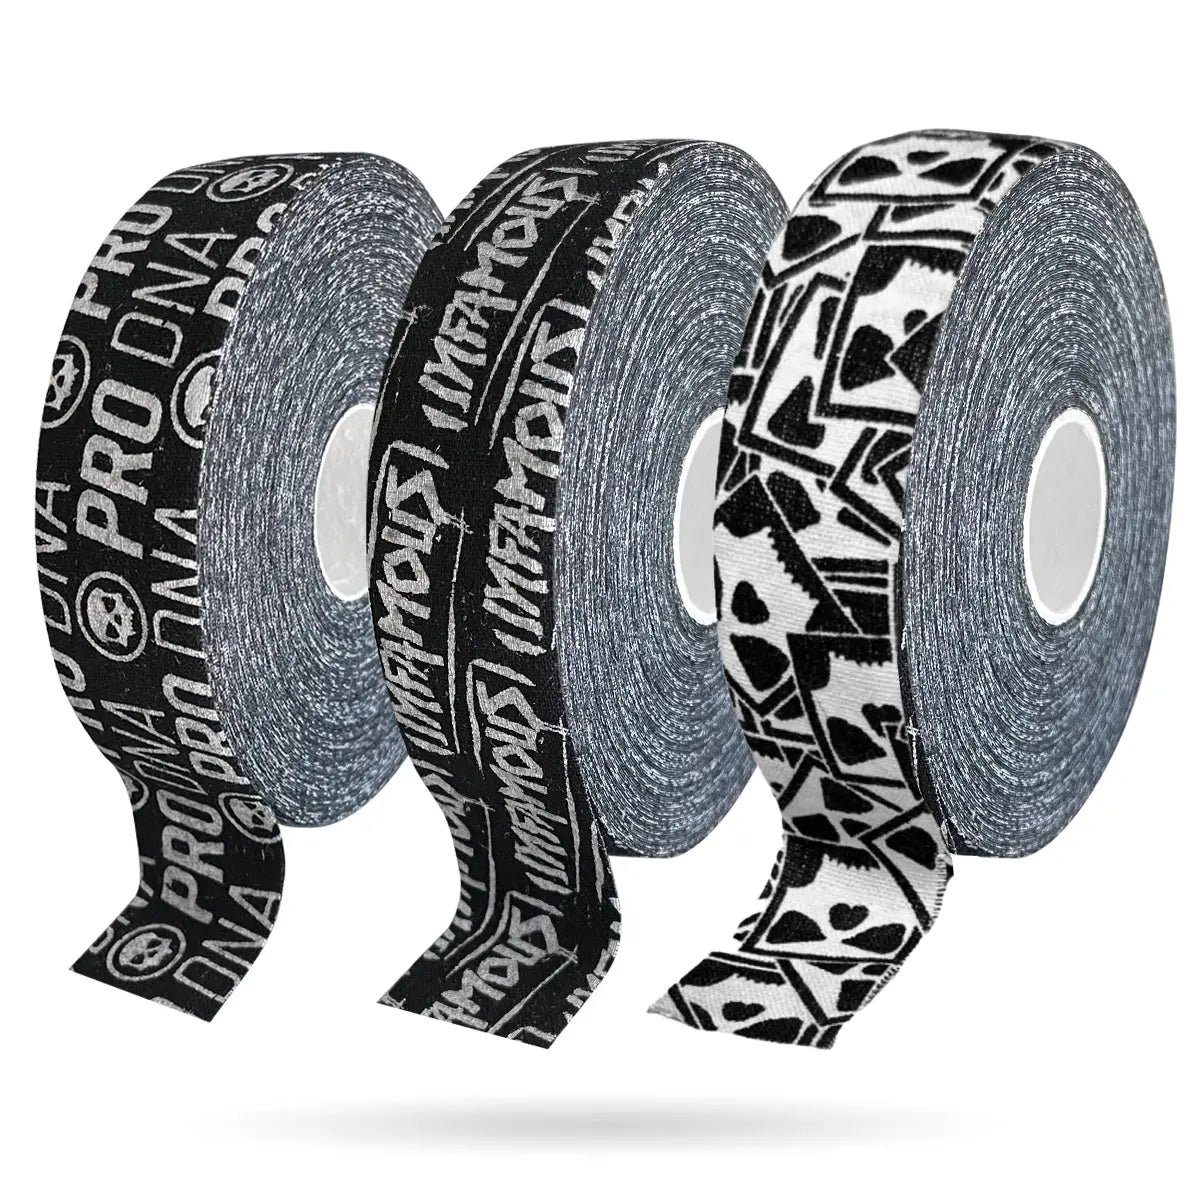 Player Pack Tape Bundle - 3 Pack Infamous Paintball